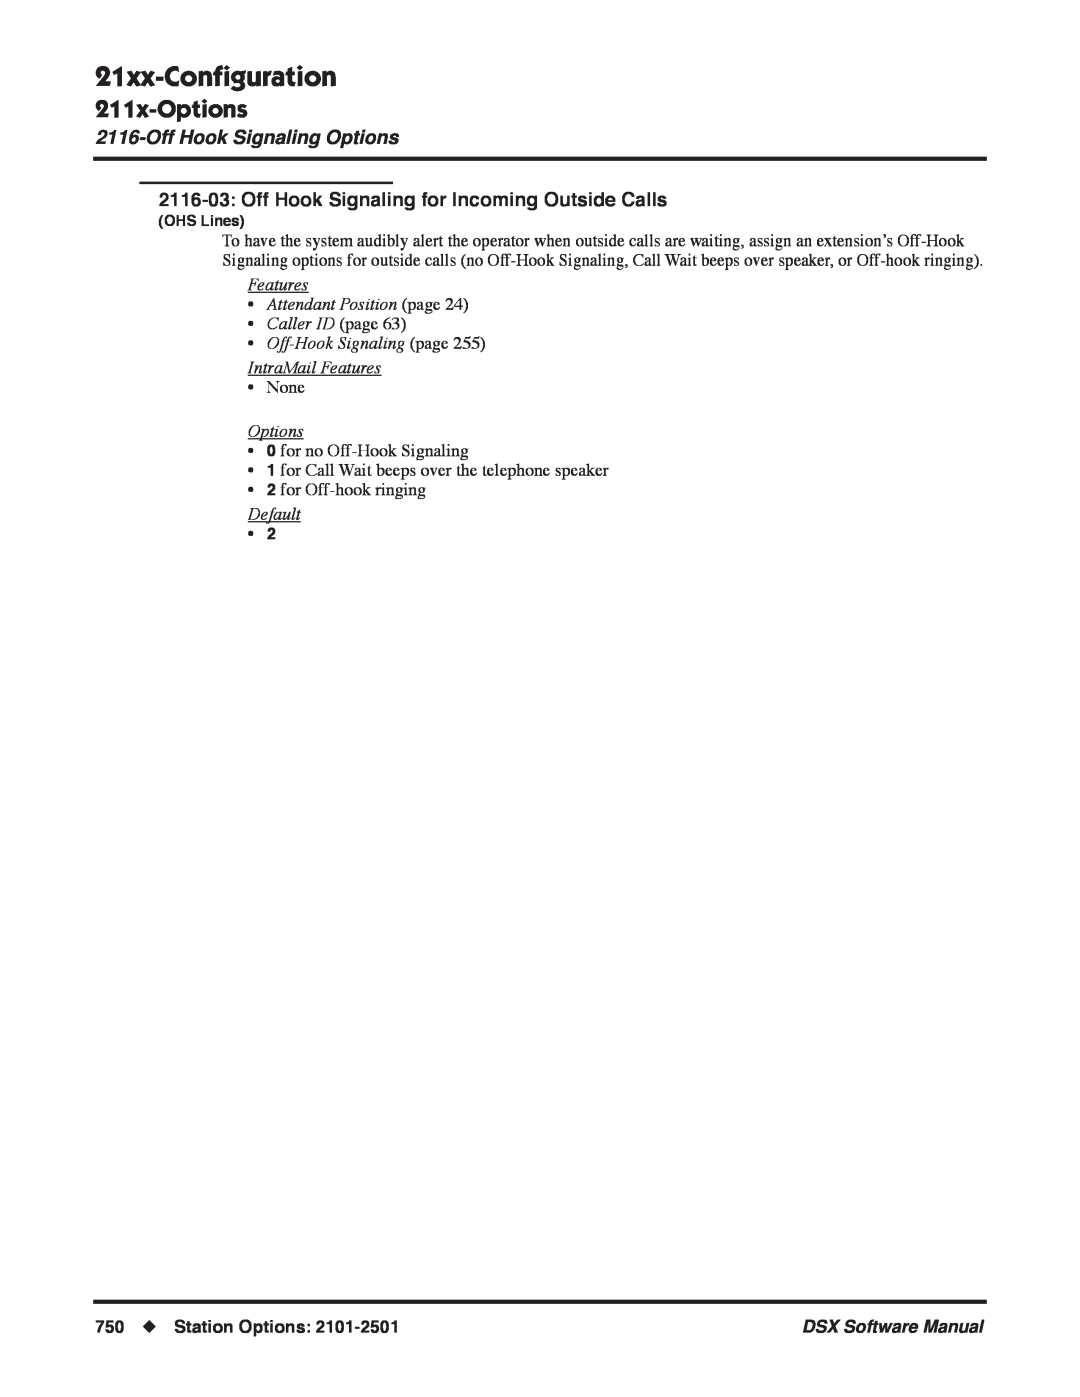 NEC N 1093100, P 21xx-Conﬁguration, 211x-Options, OffHook Signaling Options, •Off-HookSignaling page IntraMail Features 